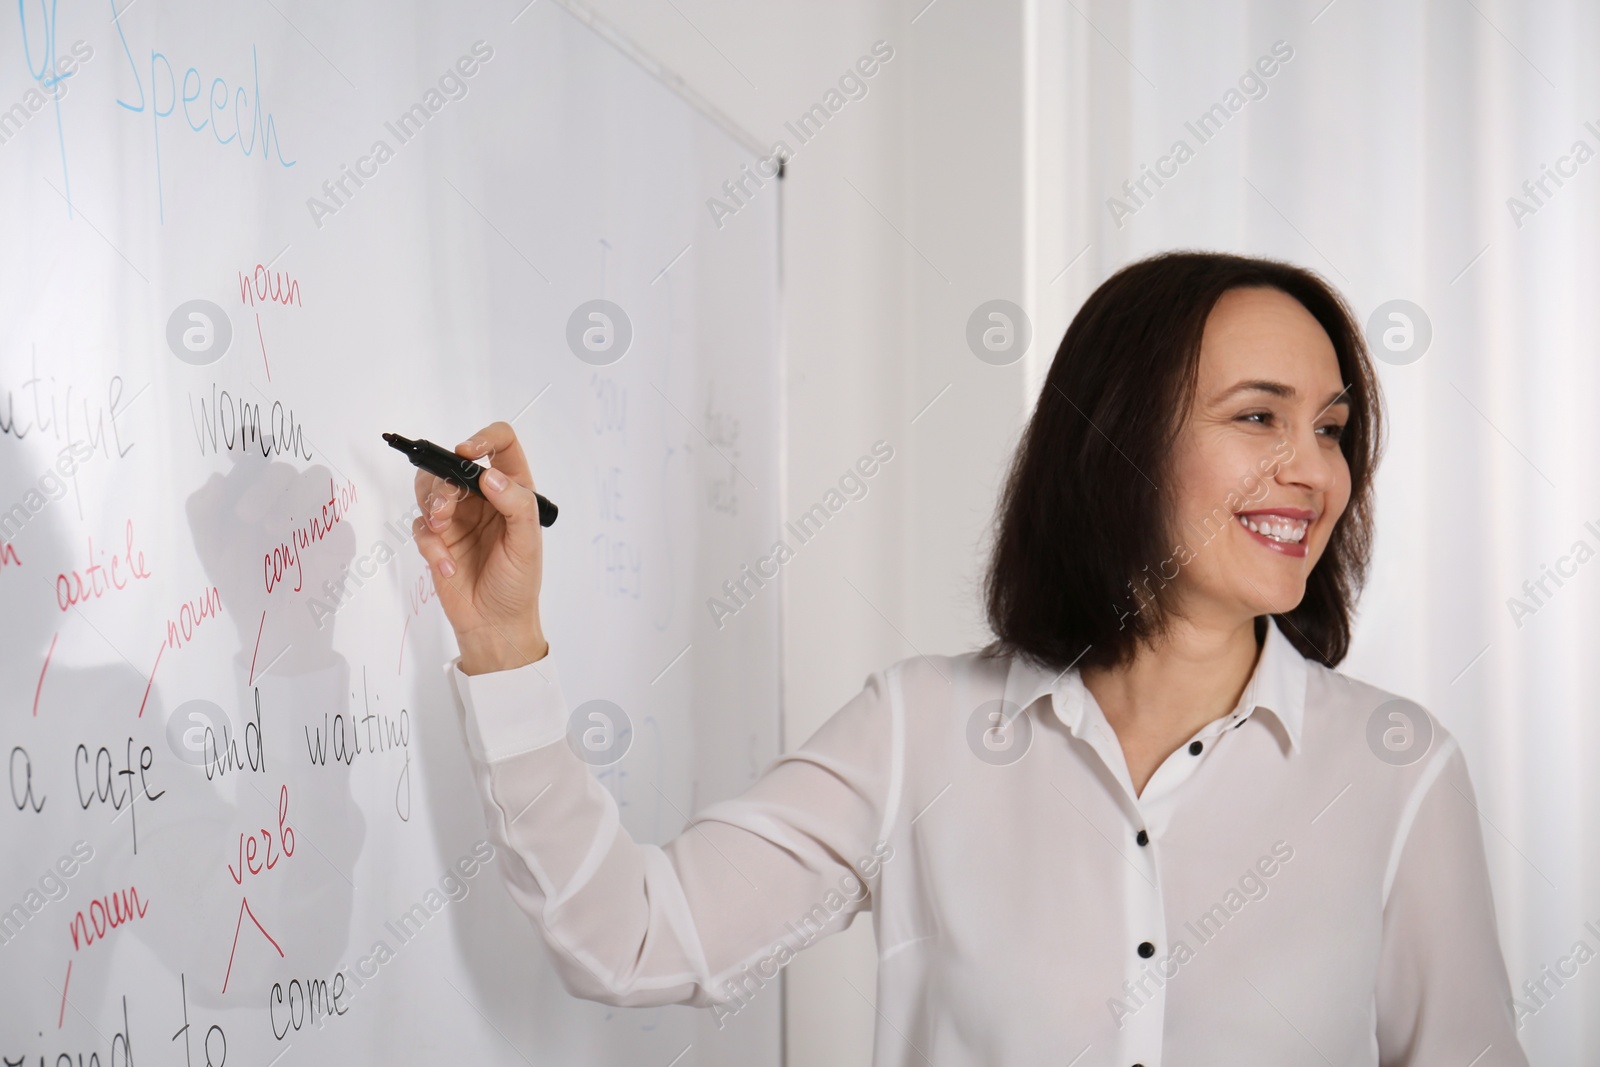 Photo of English teacher giving lesson near whiteboard in classroom